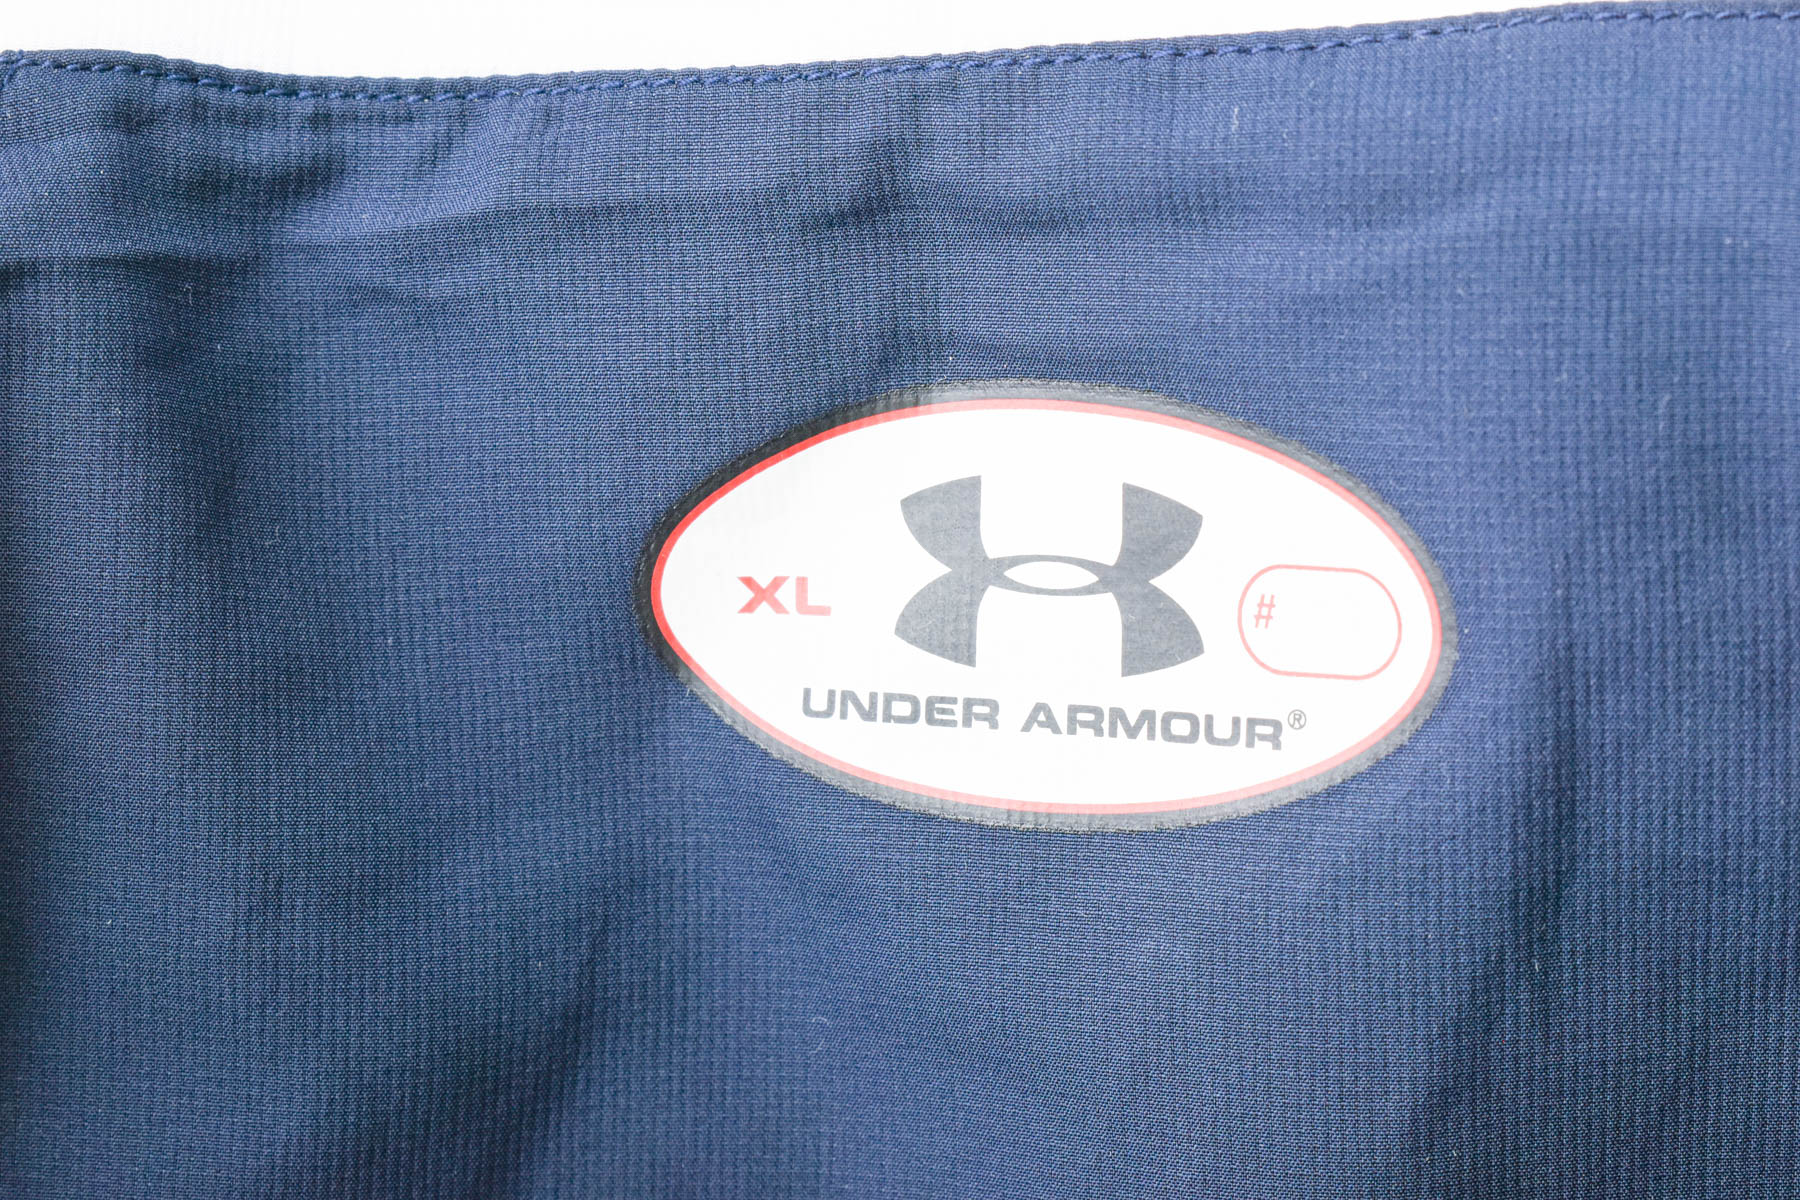 Male sports top - UNDER ARMOUR - 2